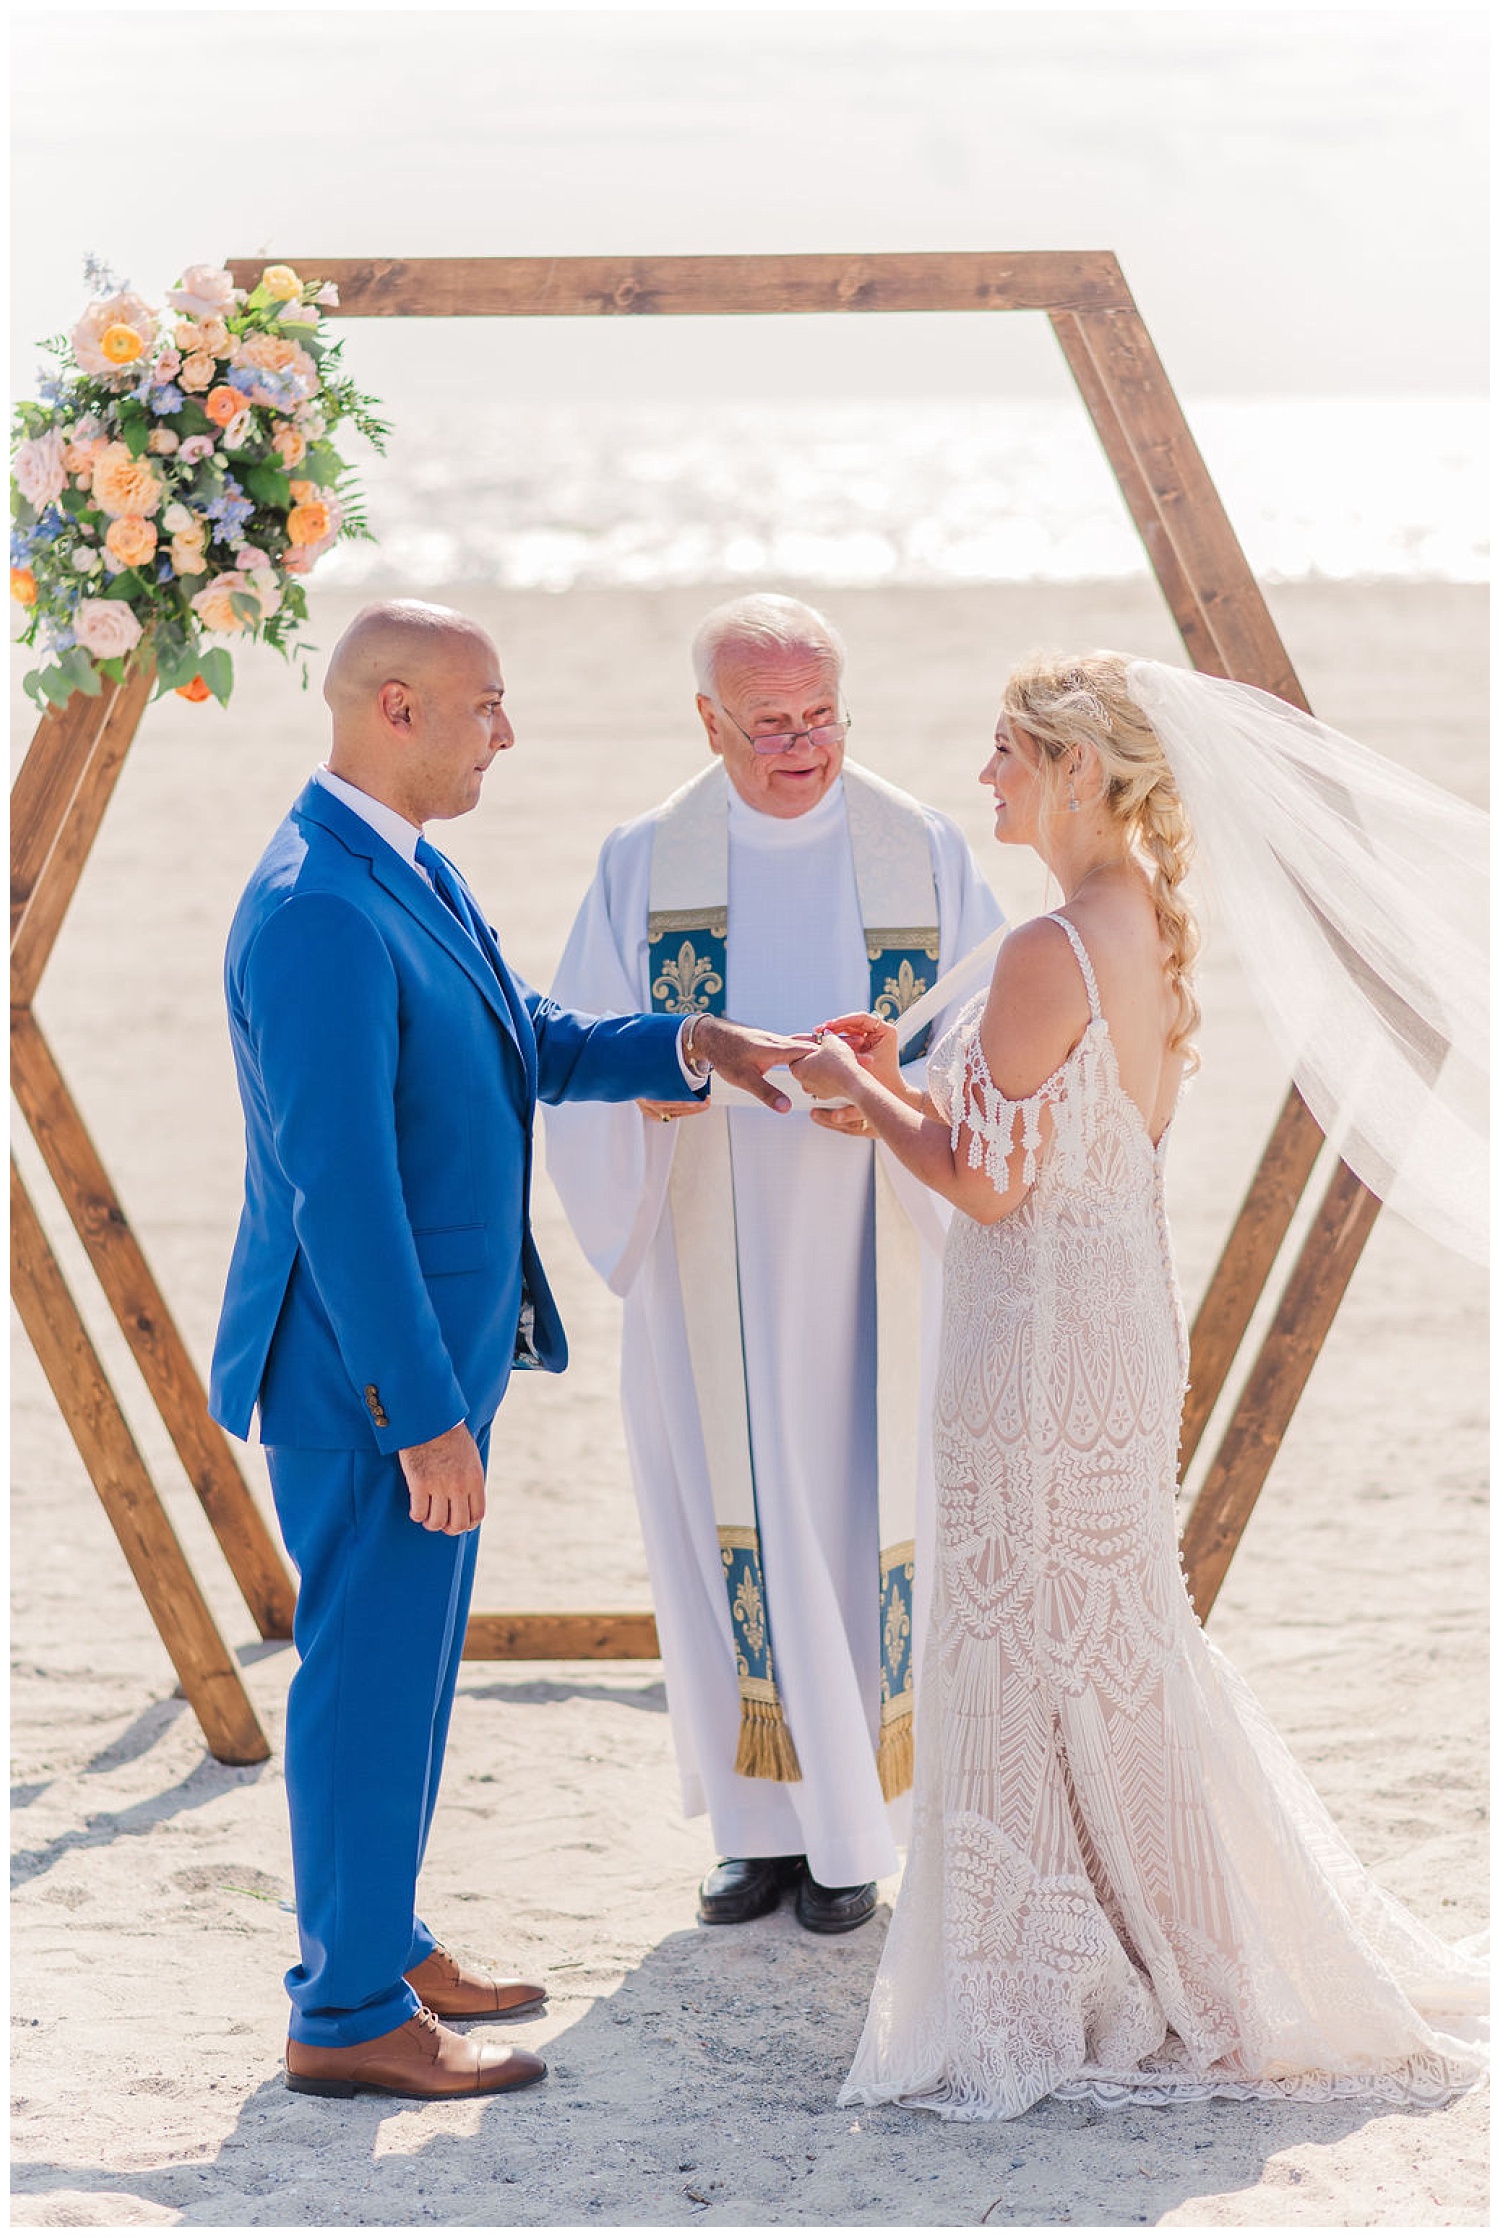 bride putting on the groom's ring at wedding ceremony on the beach